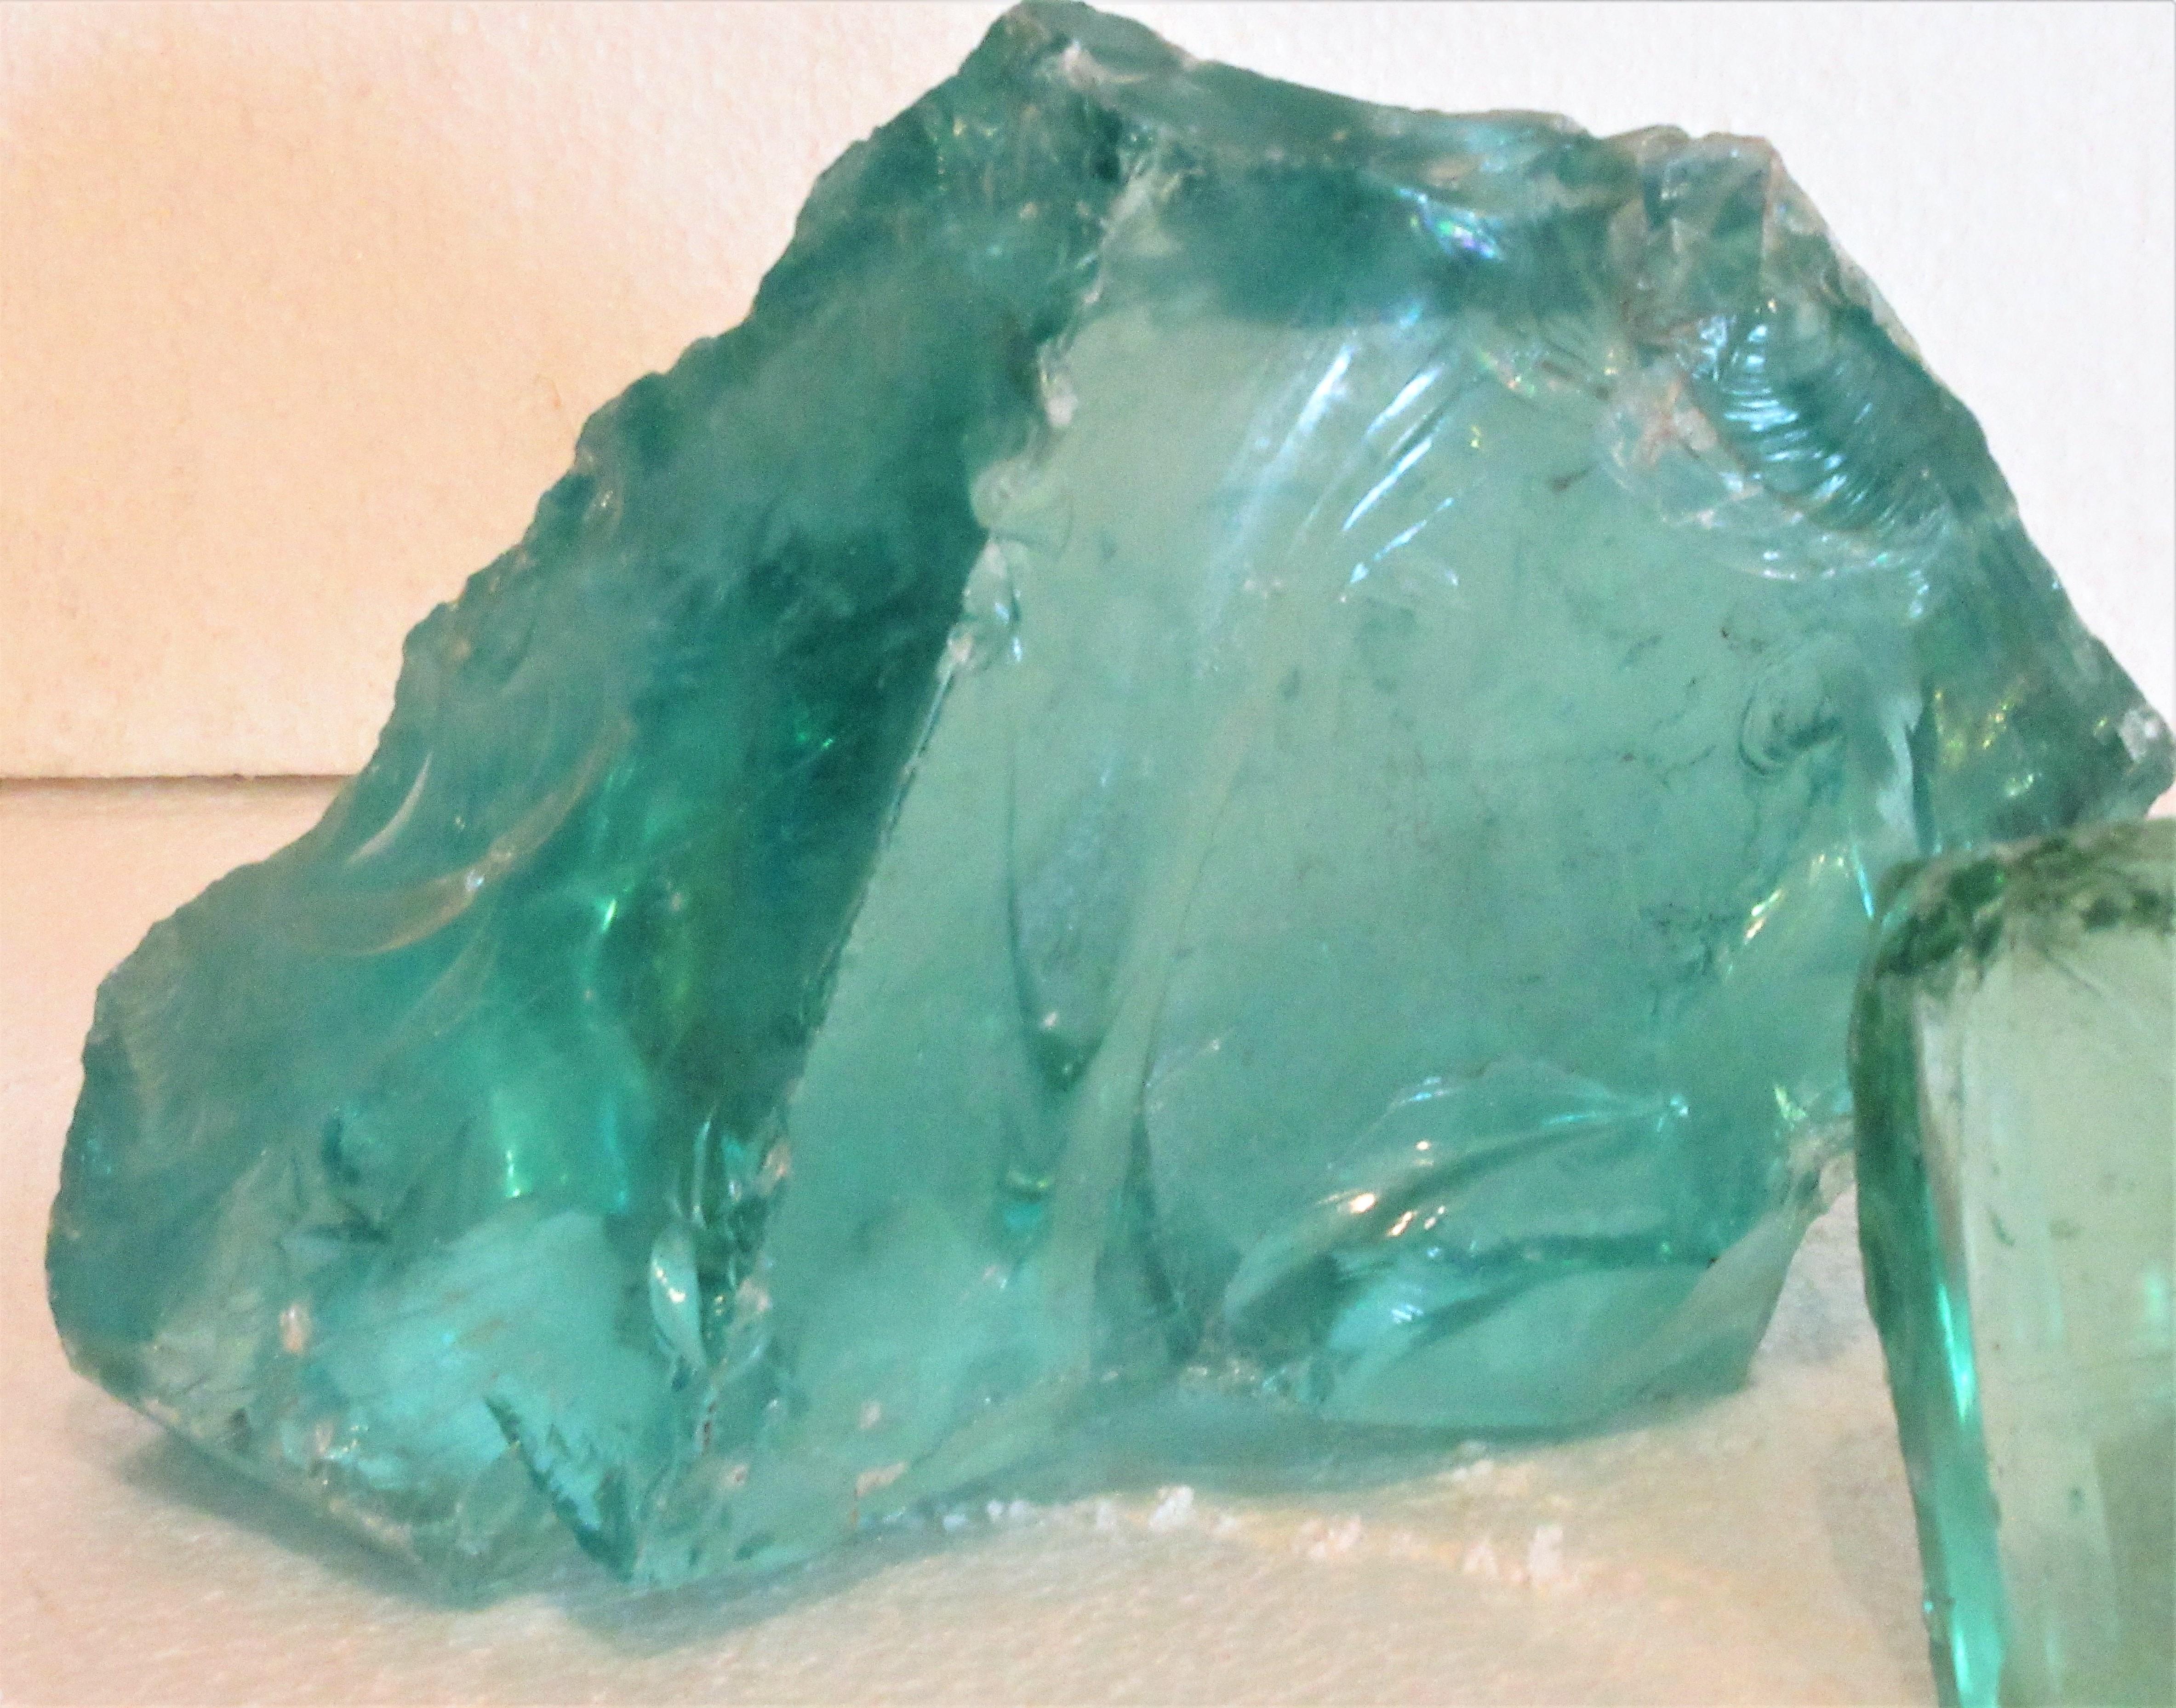 Two raw free form chunks of old factory glass cullet. Larger aqua - measuring as shown in images - 10 inches wide x 5 1/2 inches deep x 9 inches high. Smaller light green aqua - measuring as shown in images - 8 1/2 inches wide x 6 inches deep x 6